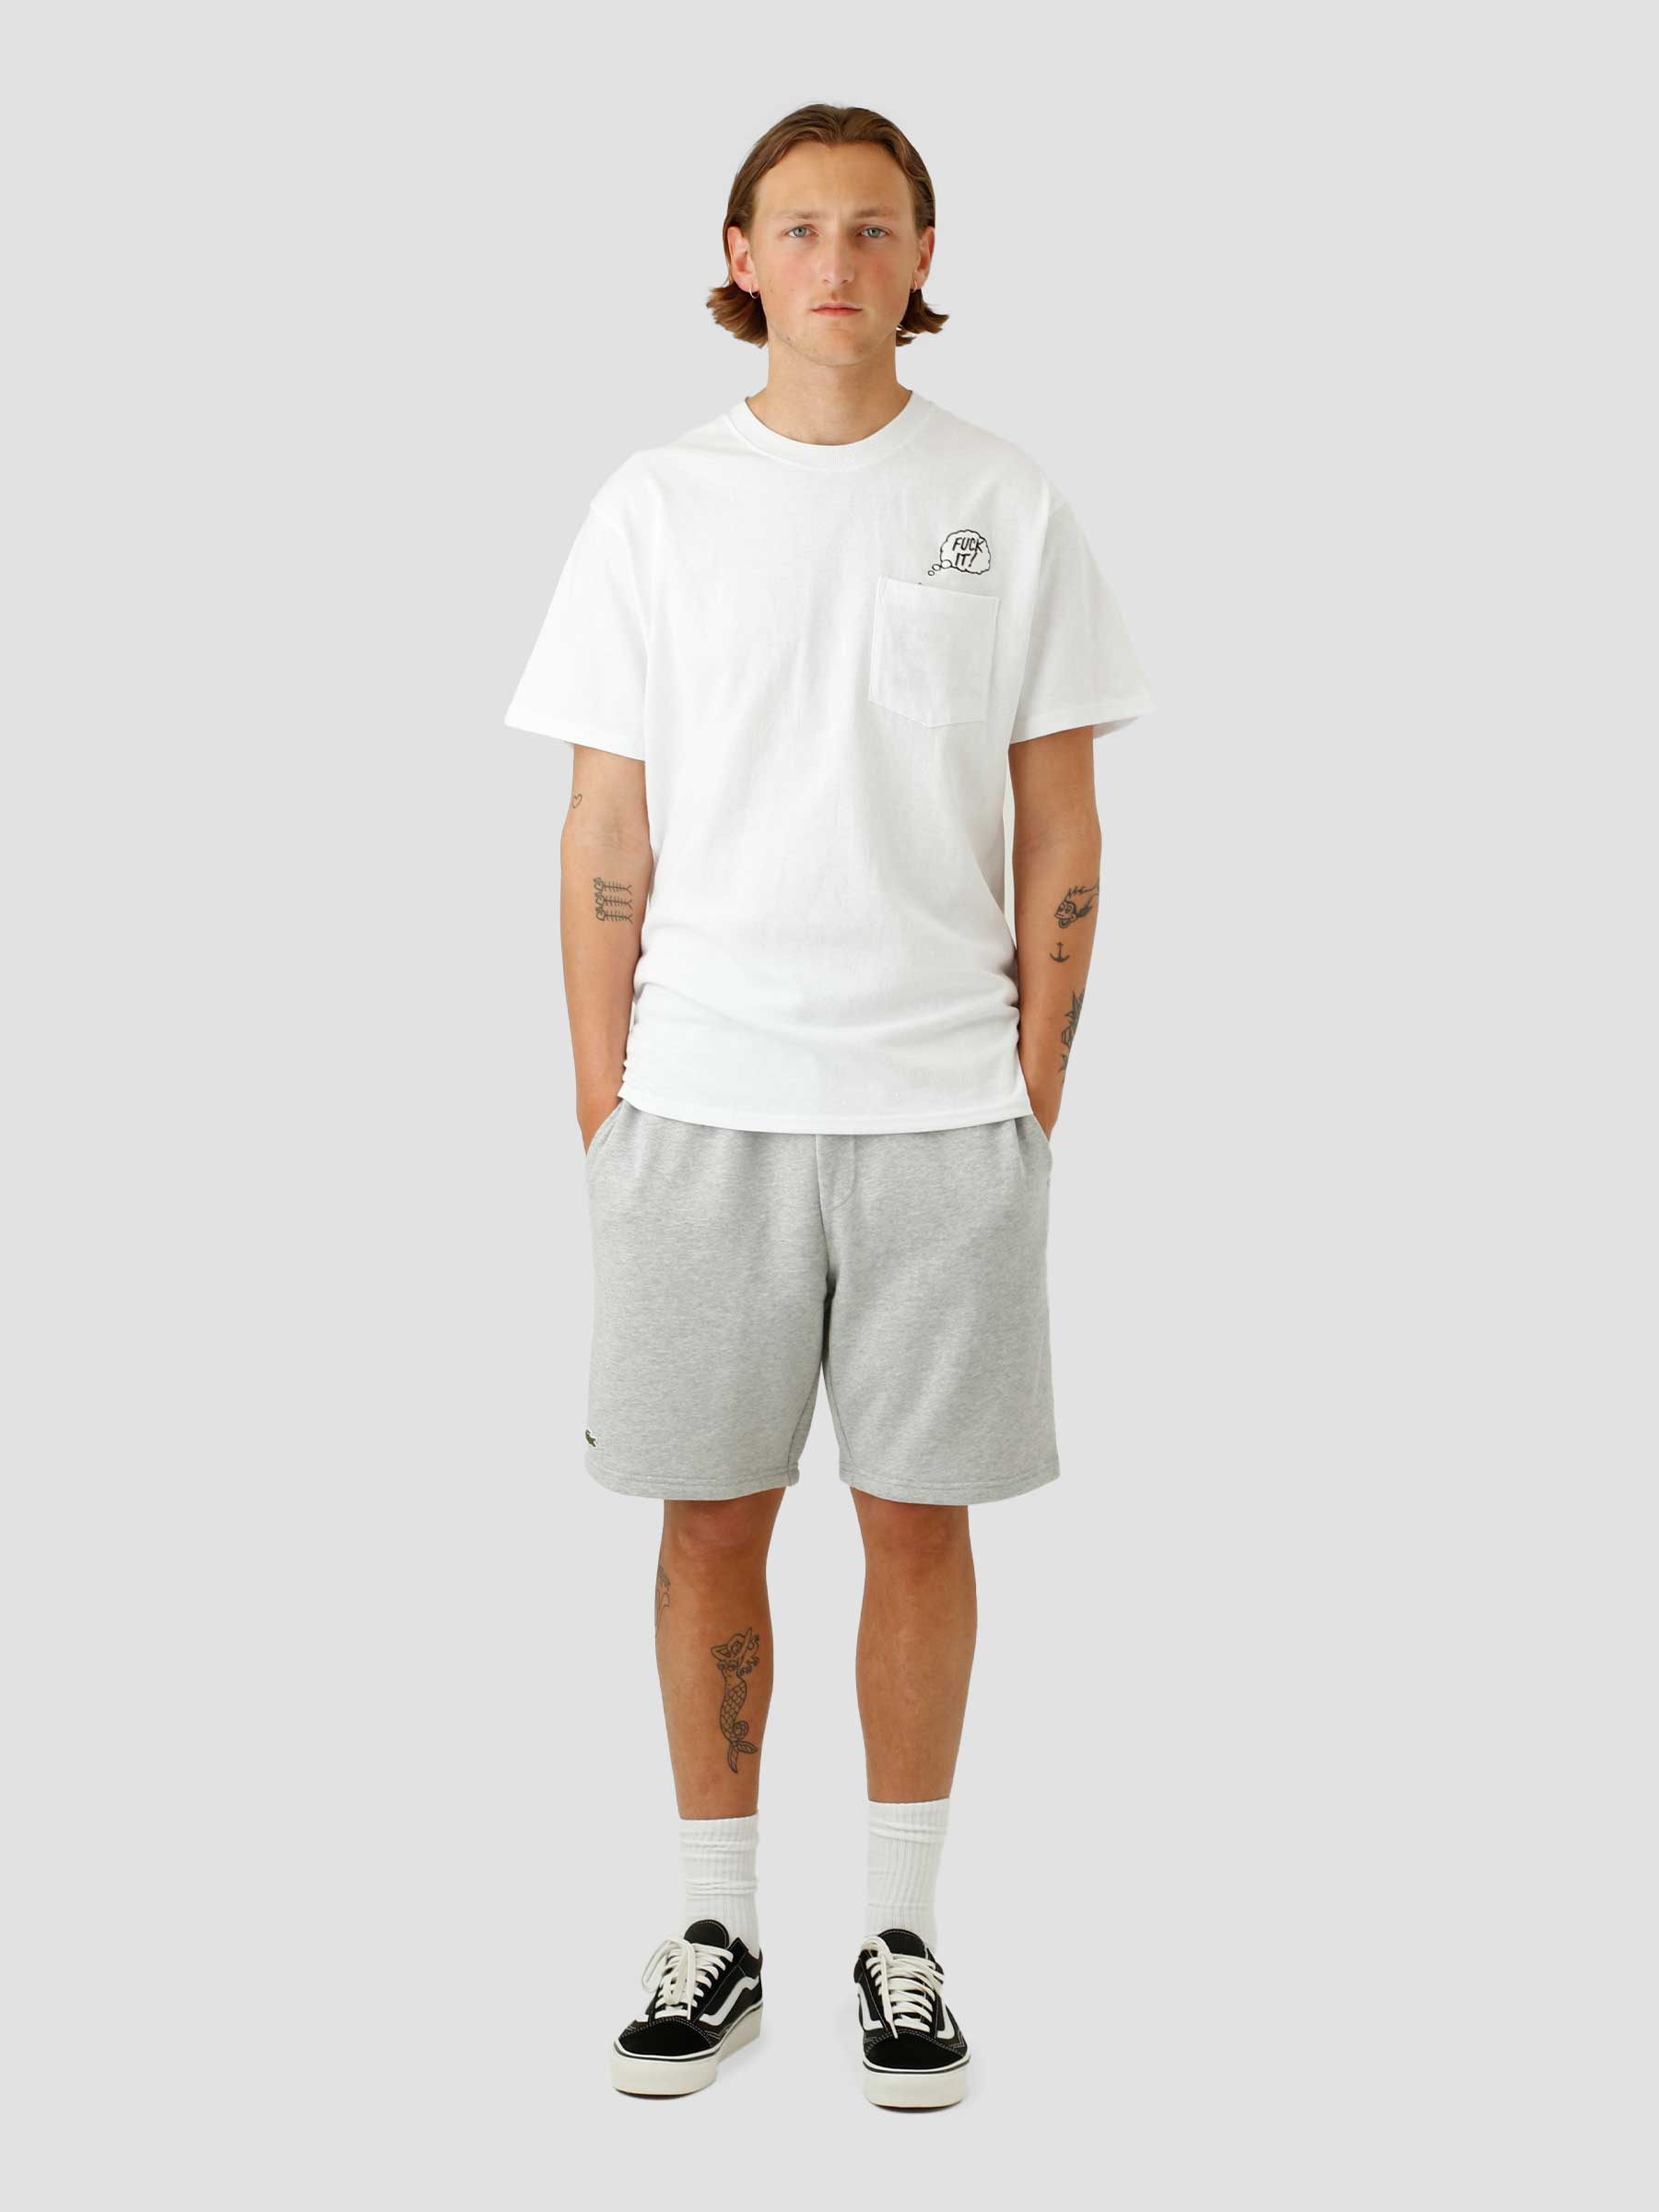 In The Pocket SS T-shirt White TS01723-WHITE